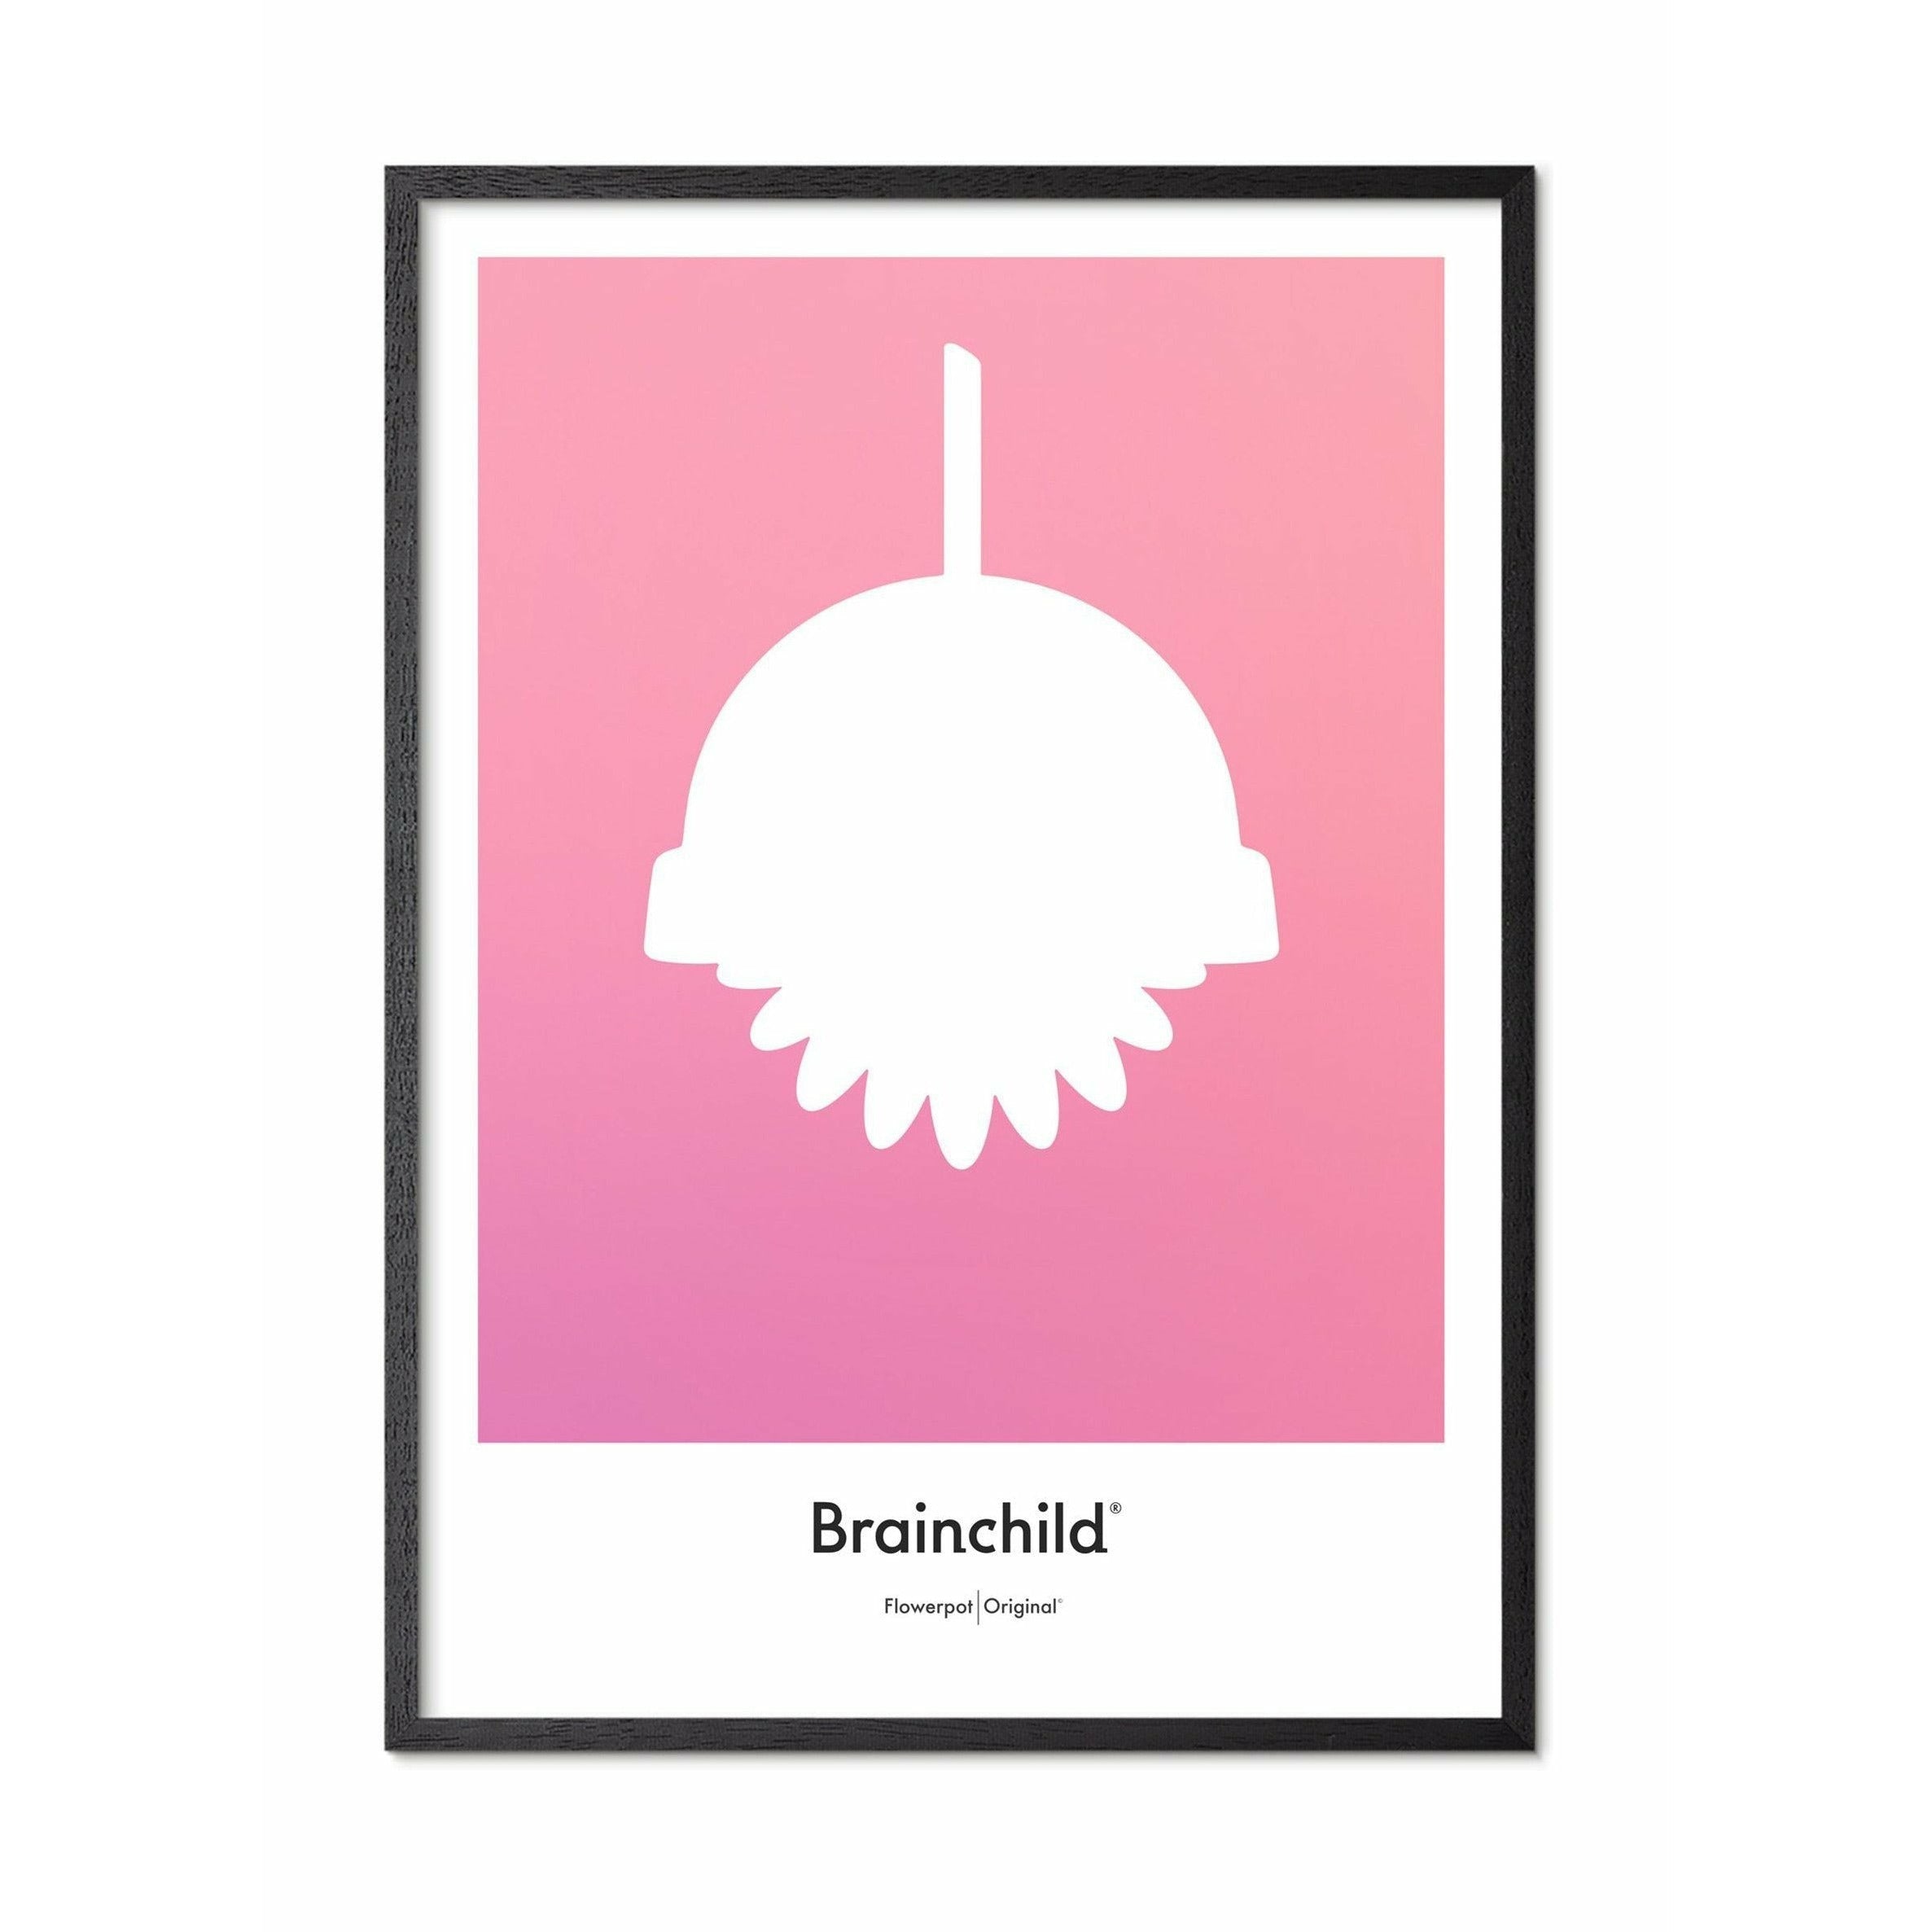 Brainchild Flowerpot Design Icon Poster, Frame Made Of Black Lacquered Wood 30x40 Cm, Pink